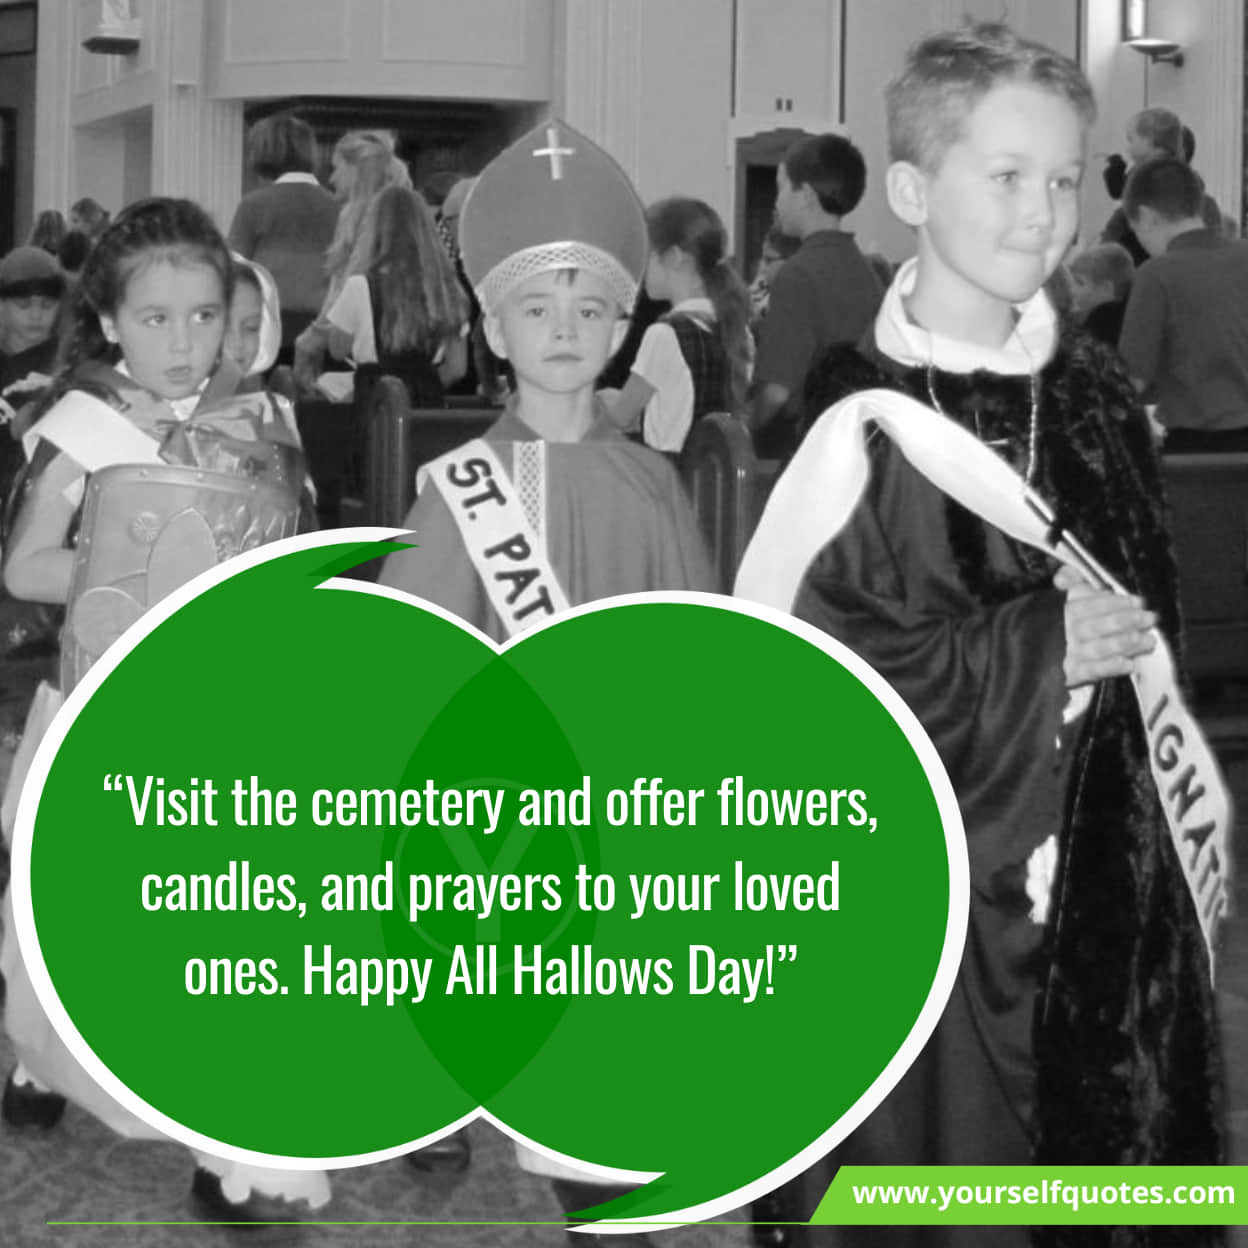 Graceful Message About Happy All Saints Day